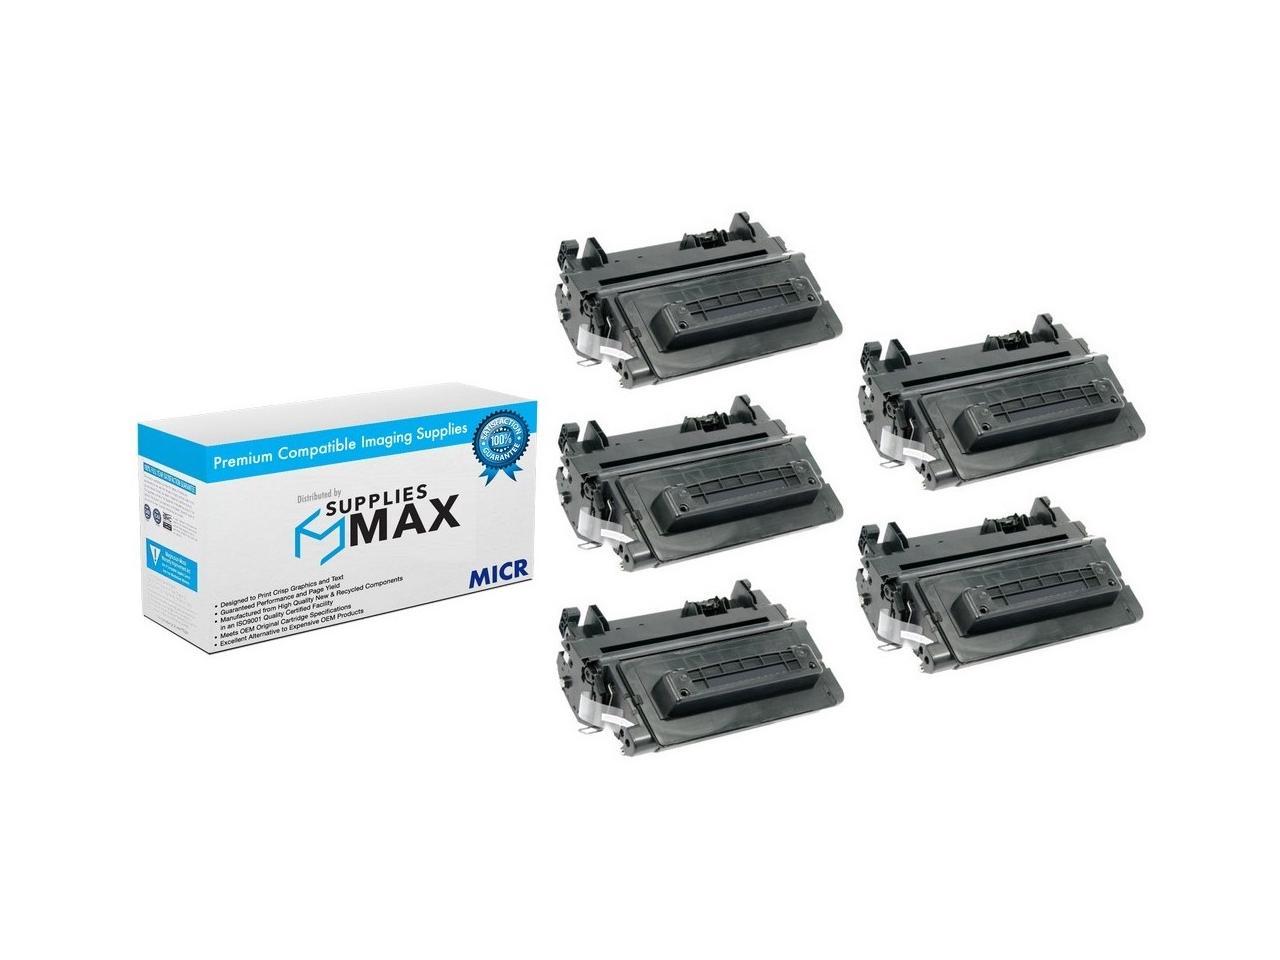 M606 Laser Printers 81A MICR 2-Pack United States Toner Brand MICR Check Printing Toner Cartridge for use in M604 10000 Page Yield. M605 